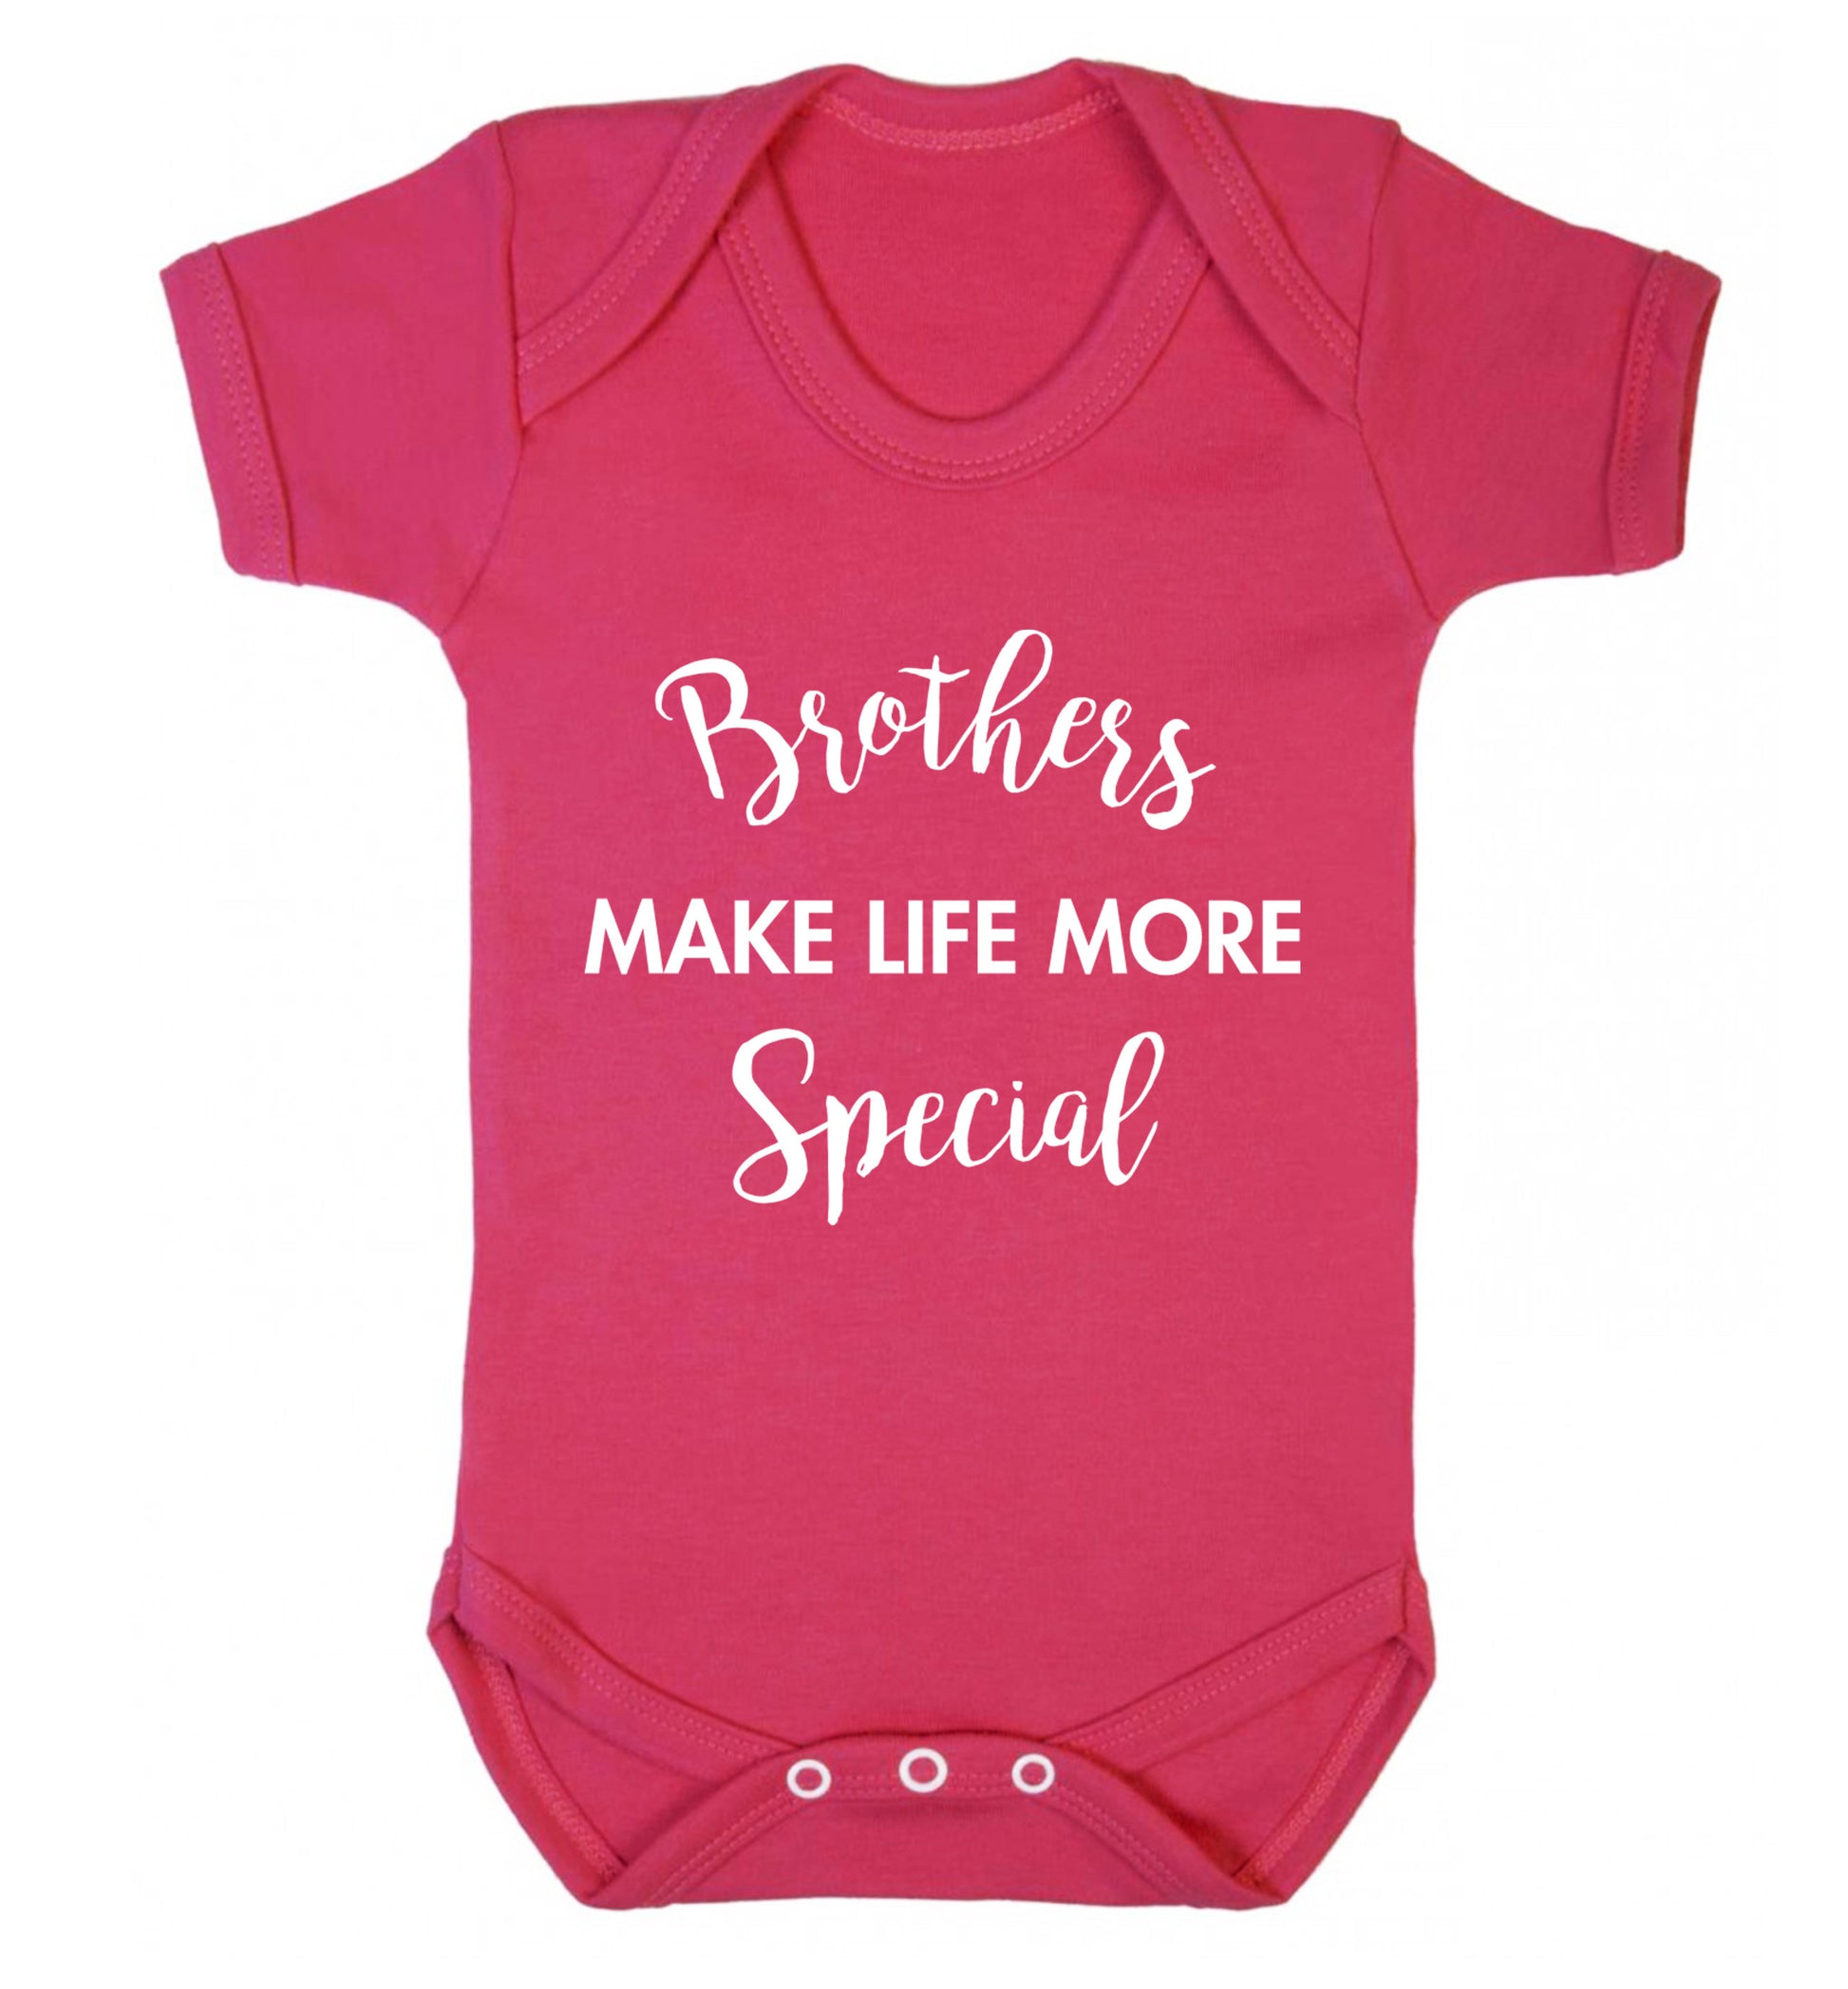 Brothers make life more special Baby Vest dark pink 18-24 months